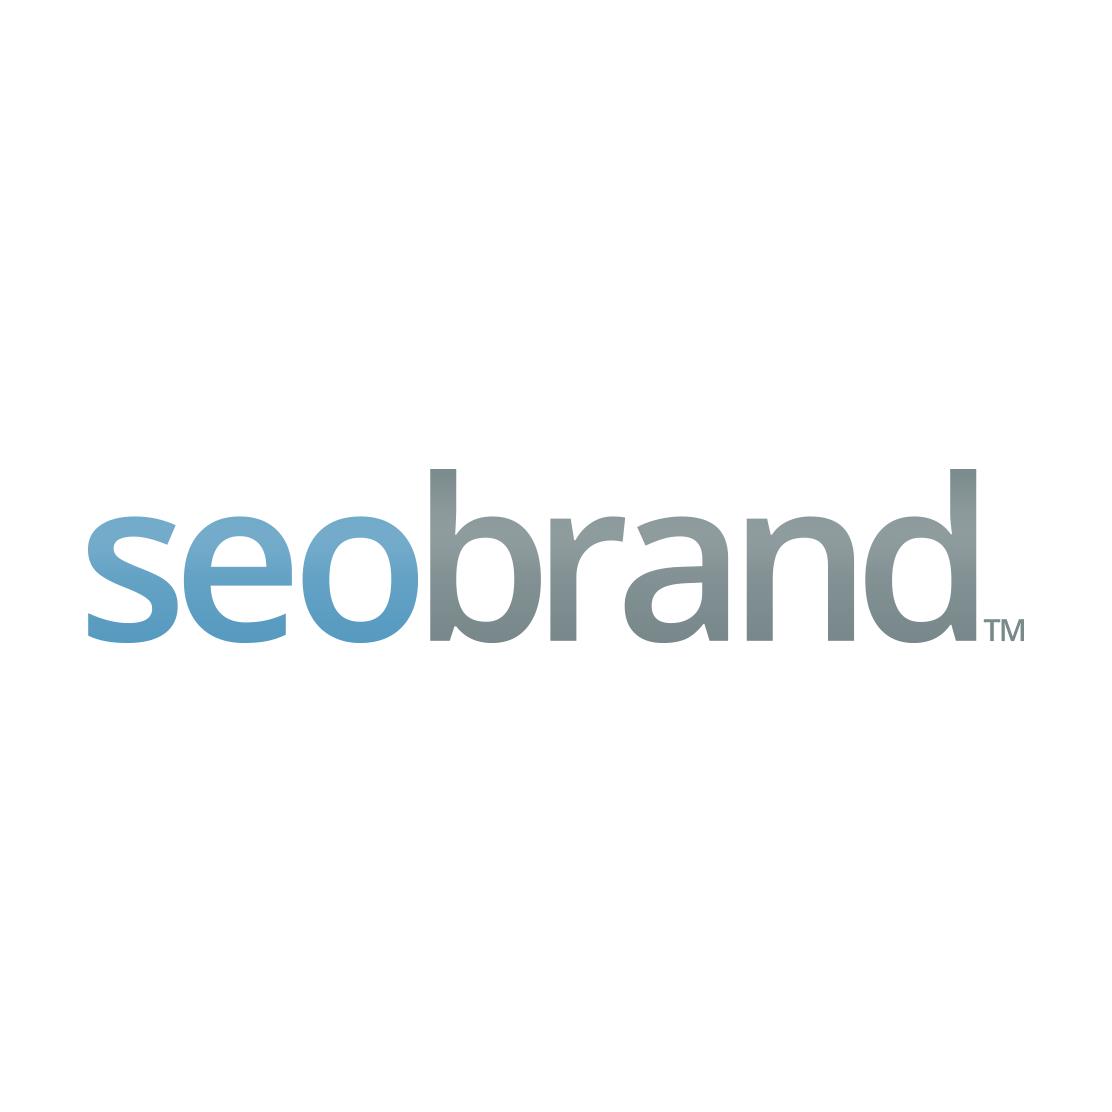 Top Philly SEO Firm Logo: SEO Brand